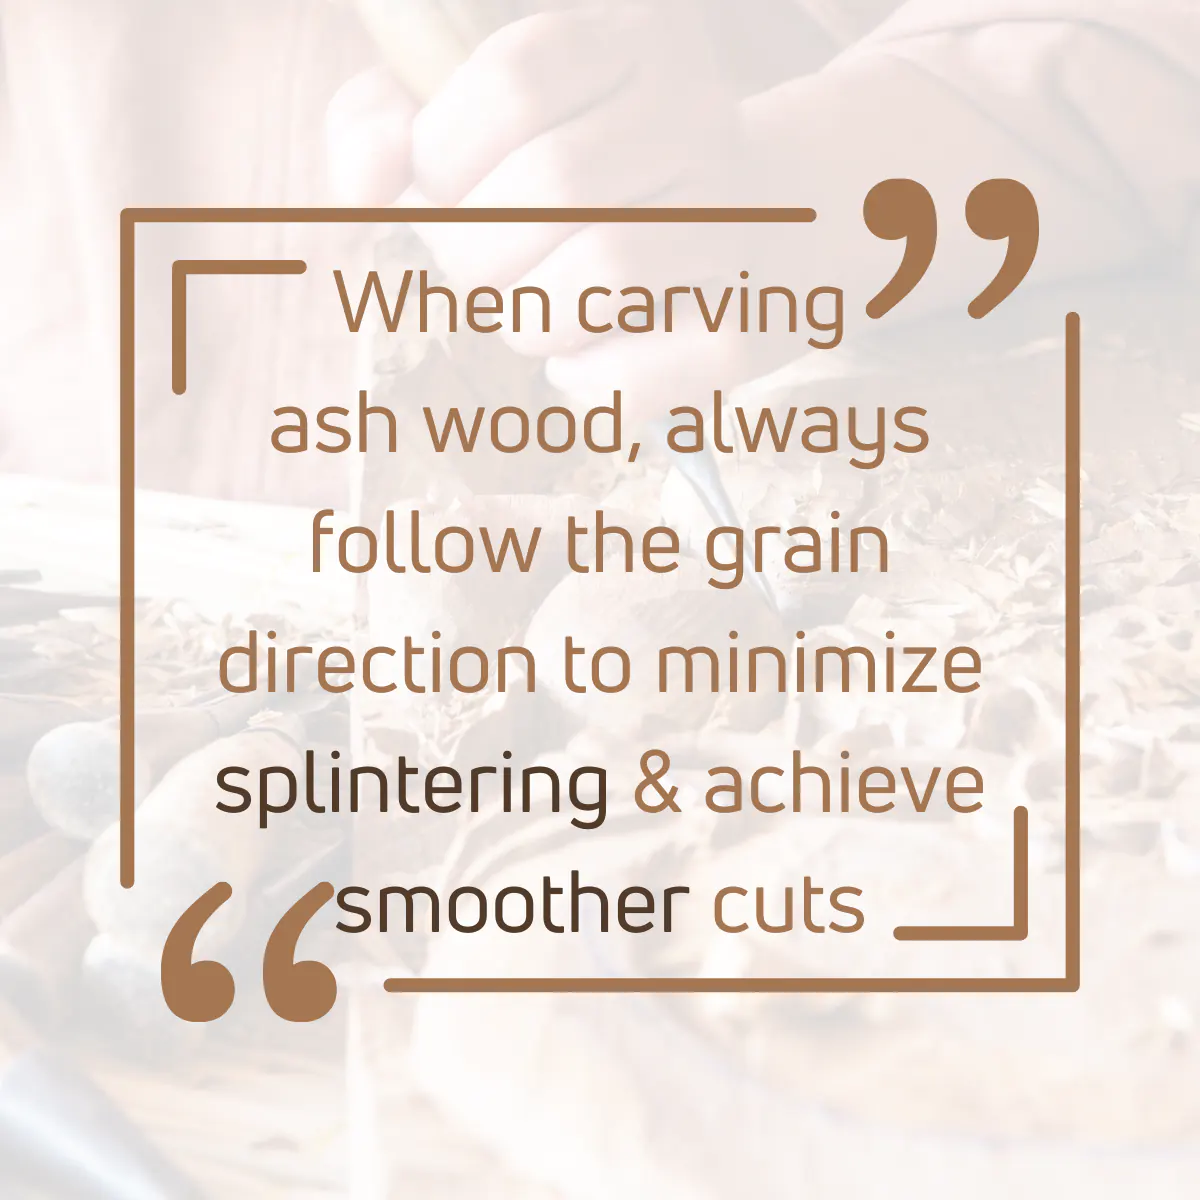 Tip for carving ash wood